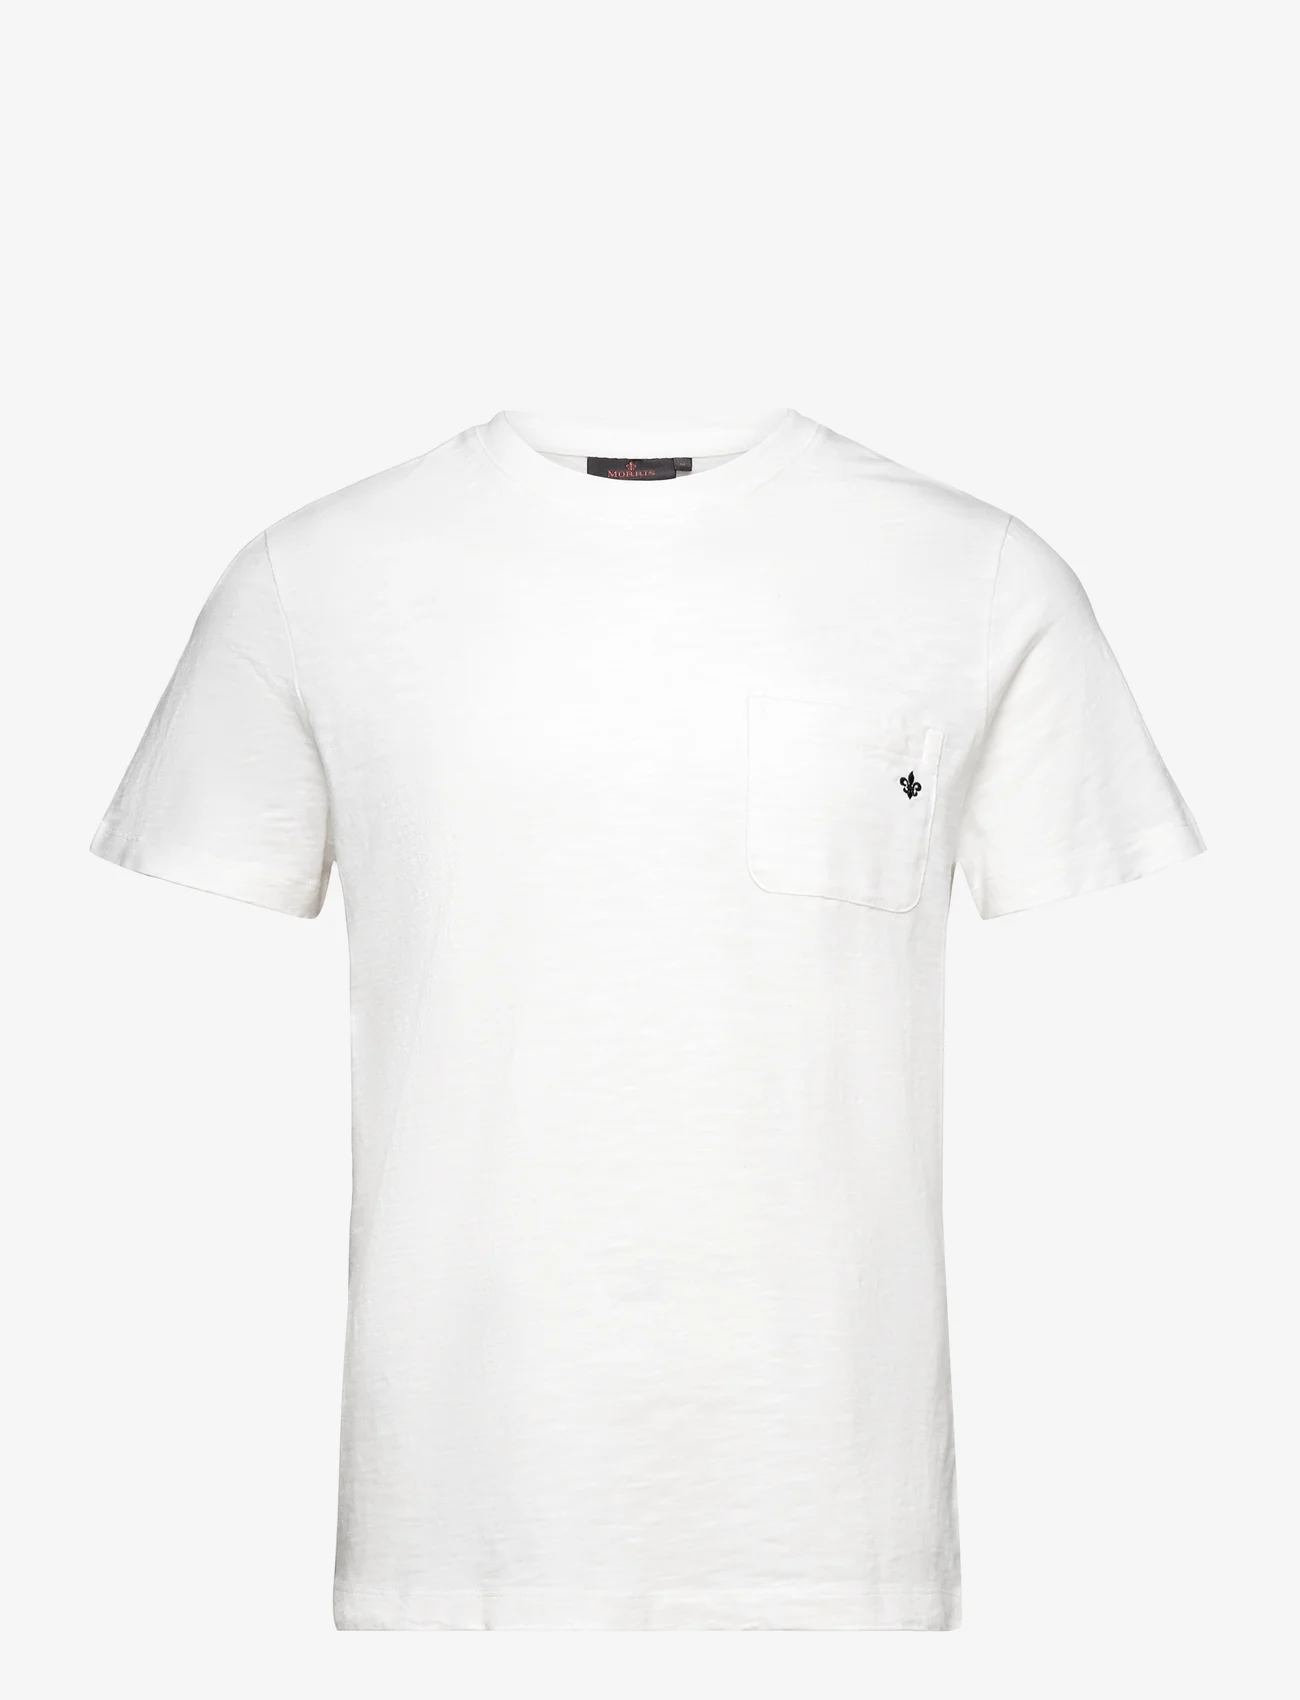 Morris - Lily Tee - basic t-shirts - off white - 0